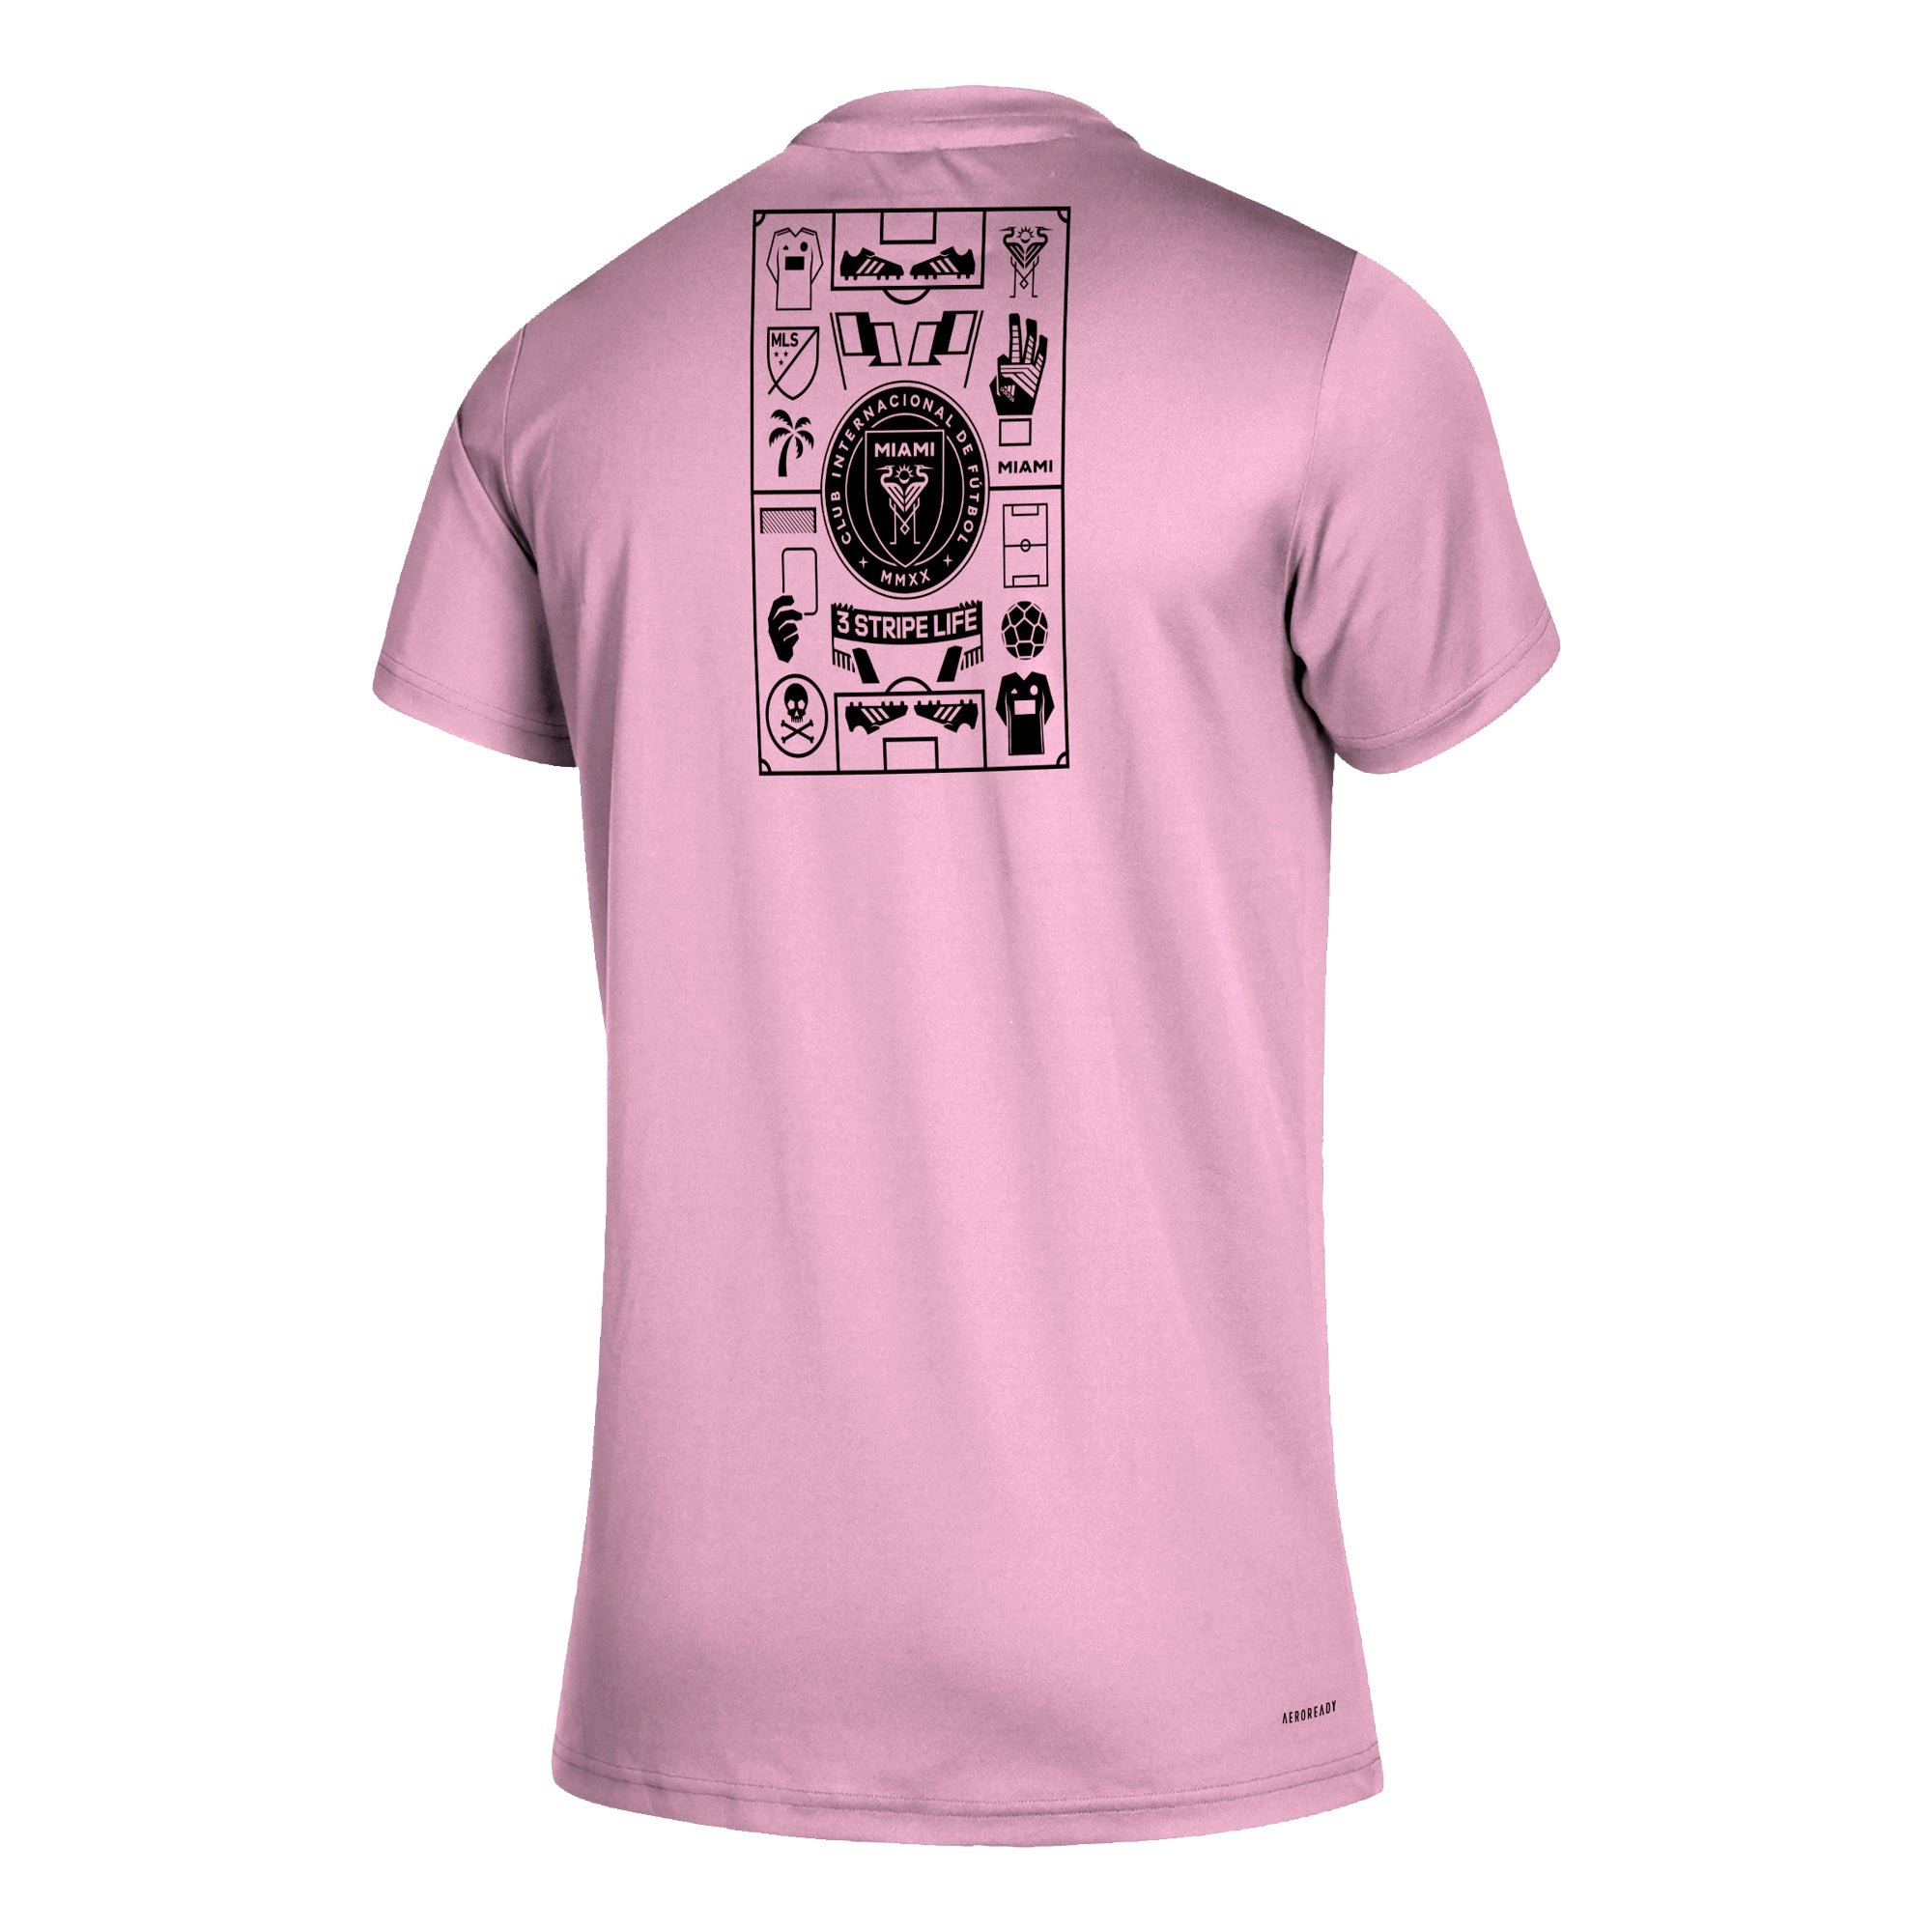 Inter Miami CF Youth SS Isn't It Iconic T-Shirt - Pink